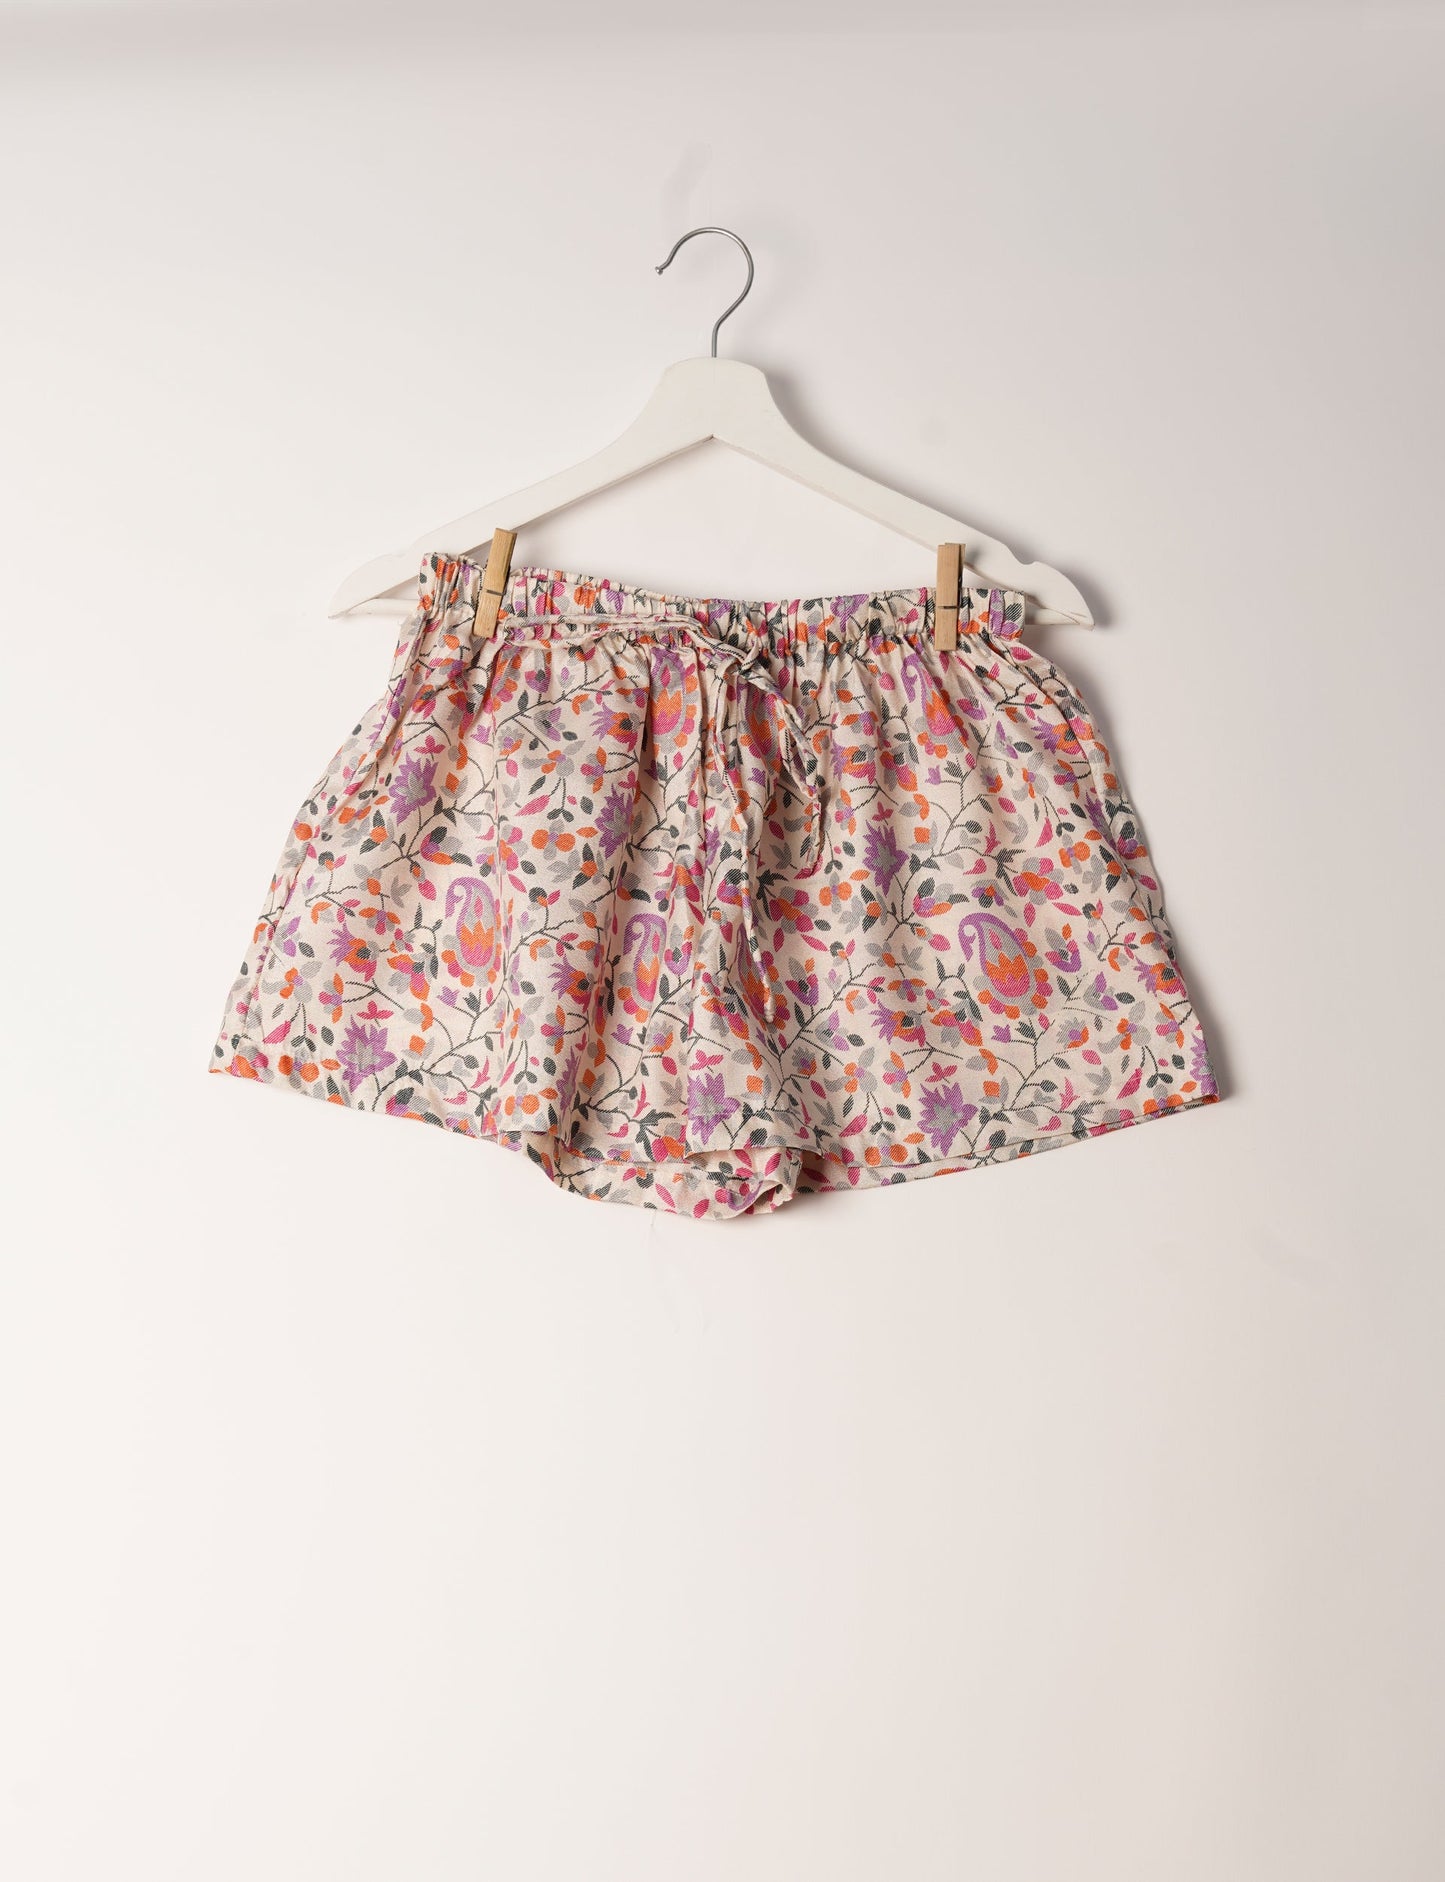 Sleep in eco-friendly luxury with our PJ Set Short. Made for the conscious consumer, these pajamas contribute to zero waste and sustainable practices. The cami top, adorned with delicate eyelash lace and cut on the bias, pairs seamlessly with the comfy shorts featuring an elasticated waist and drawstring tie.